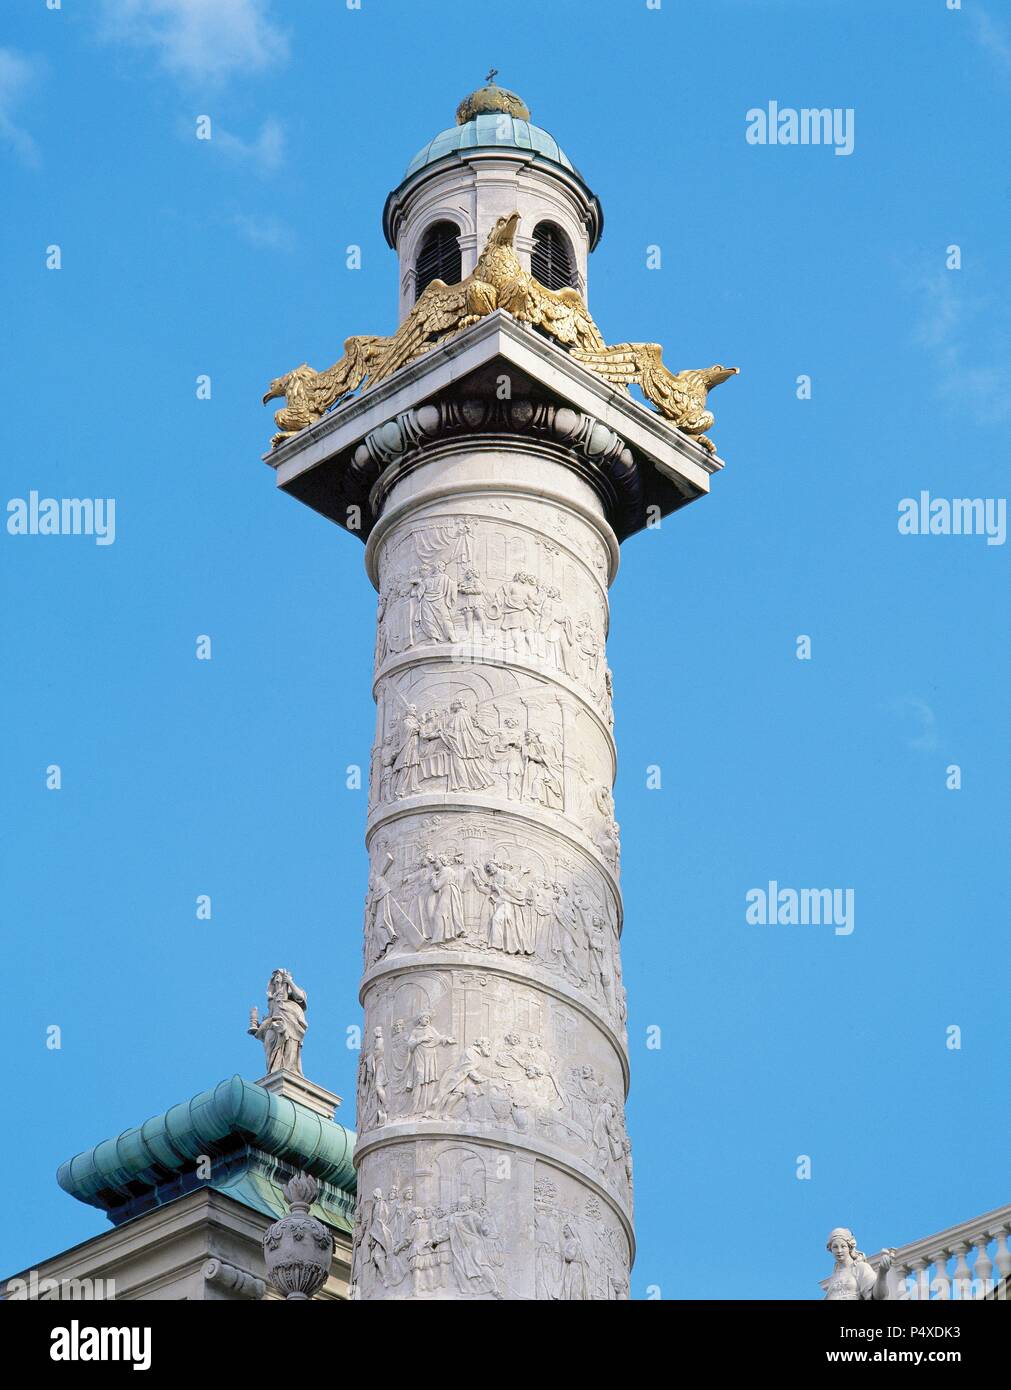 Baroque Art. Karlskirche or Church of St. Charles Borromeo (1716-1737). Column on the left side of the church, decorated with spirals and depicting scenes from the life of St. Charles Borromeo. Vienna. Austria. Stock Photo